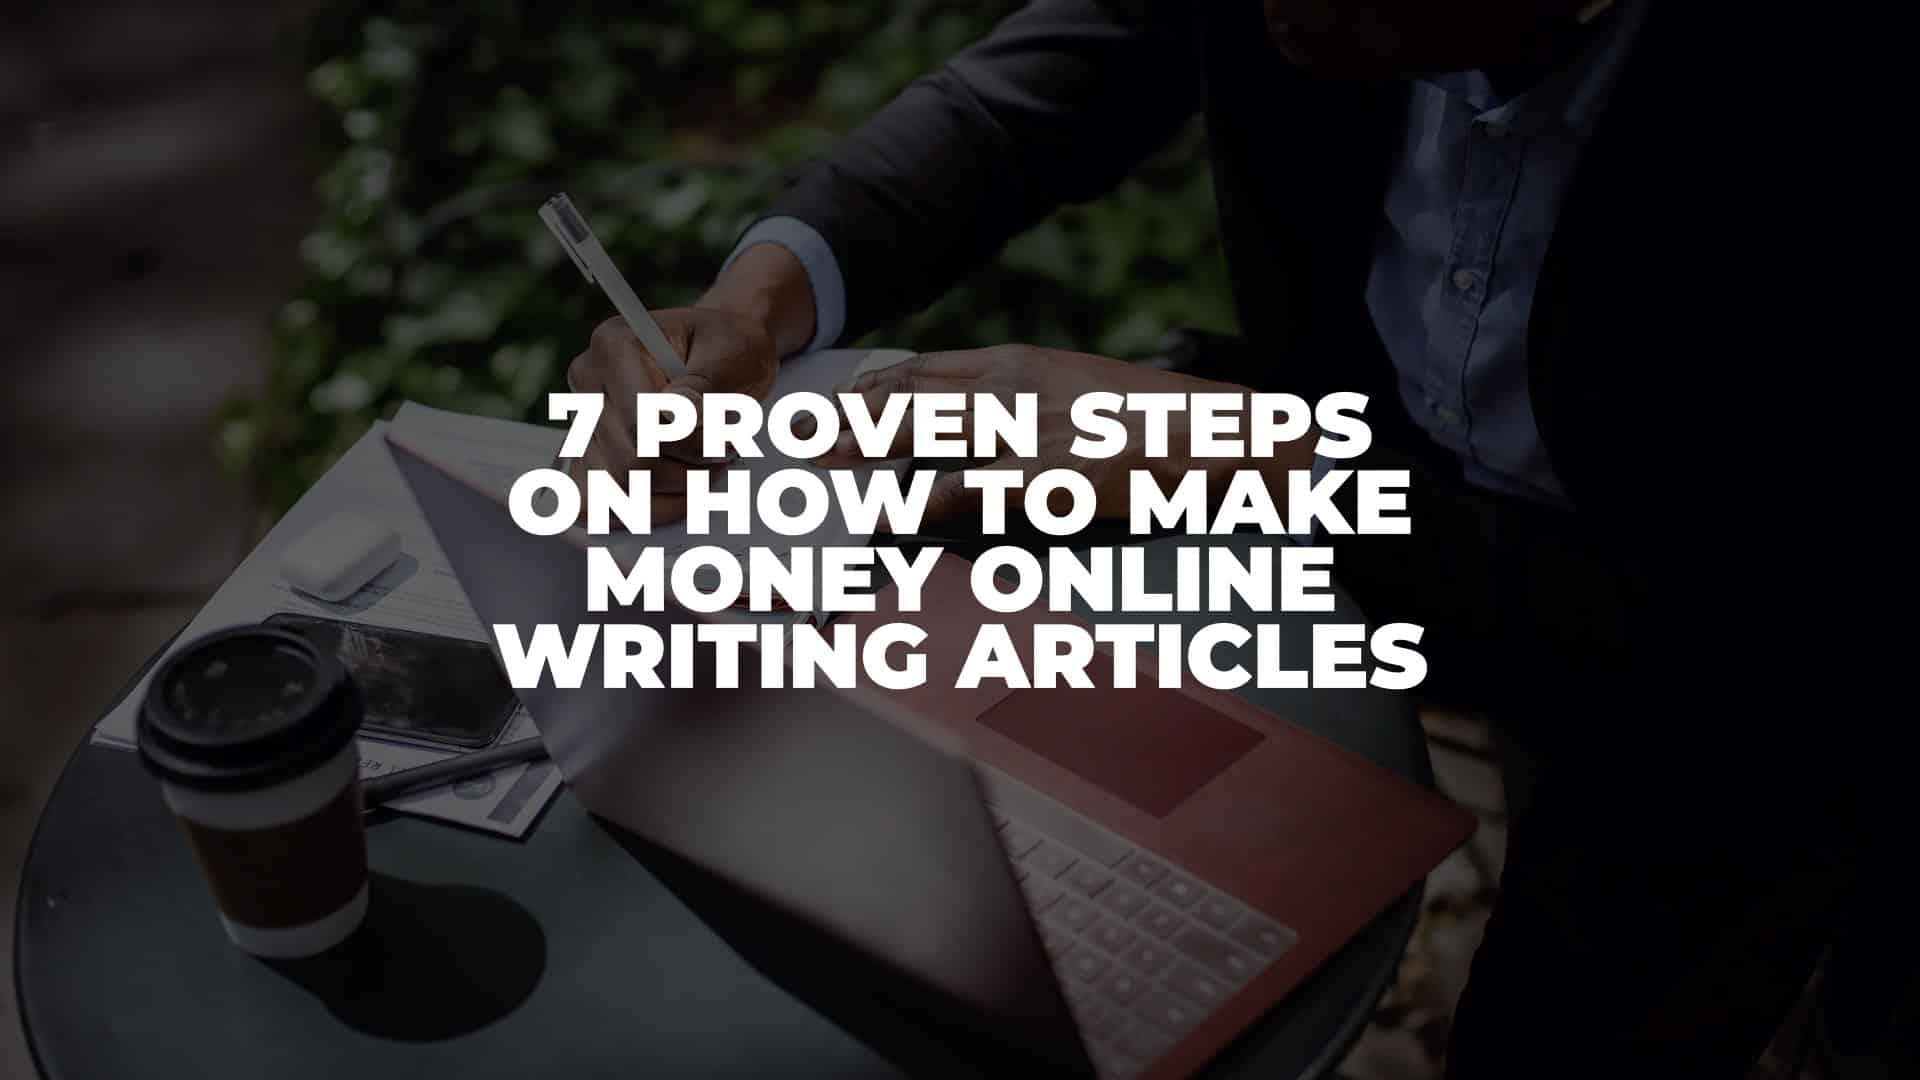 How to Make Money Online Writing Articles - Featured Image